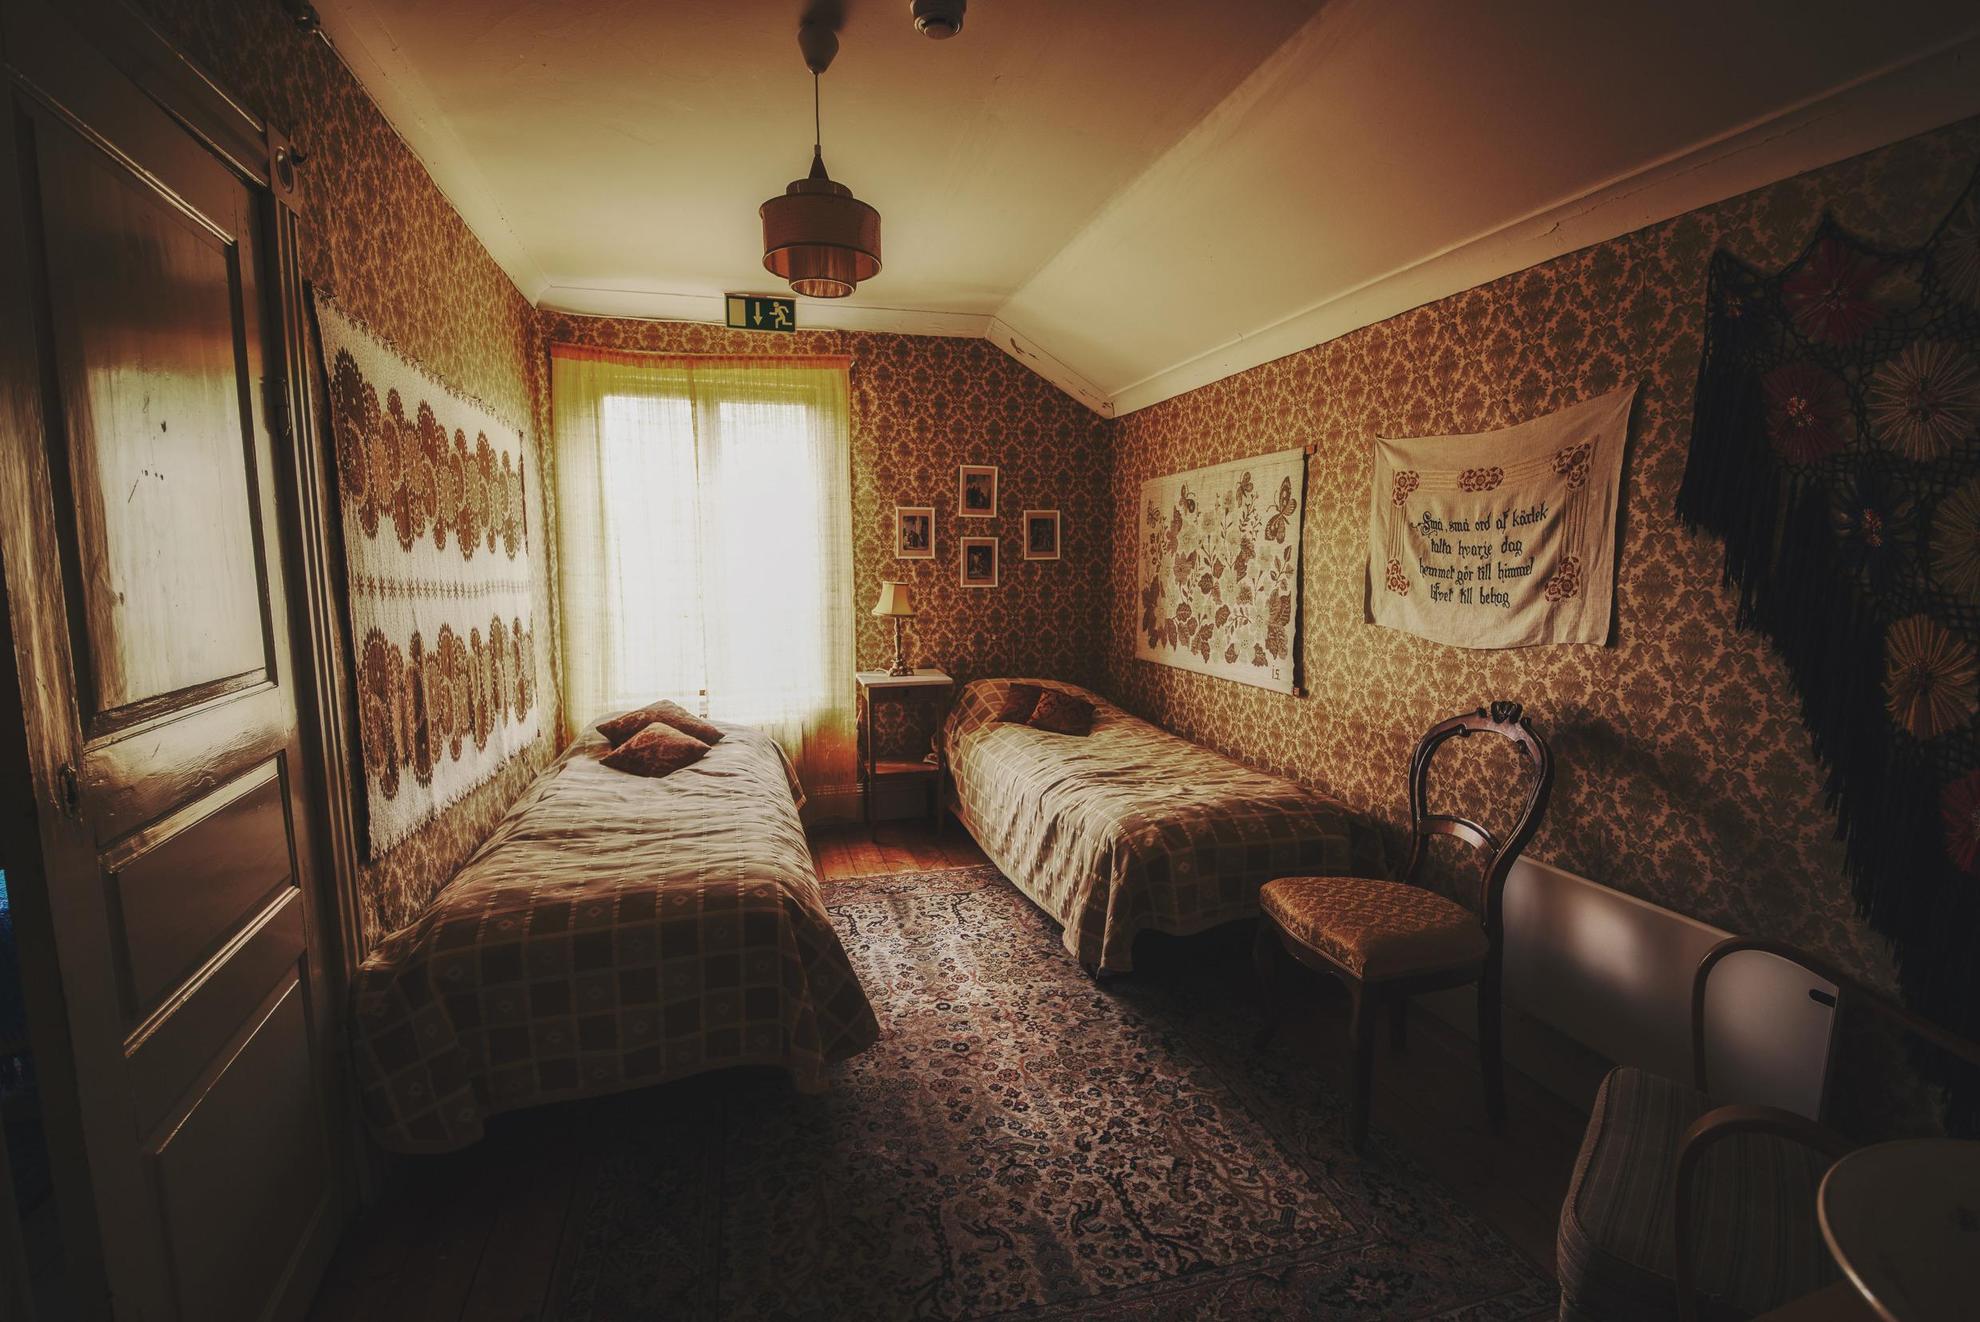 A room with decorative wallpaper, paintings, a rug, a chair and two single beds.